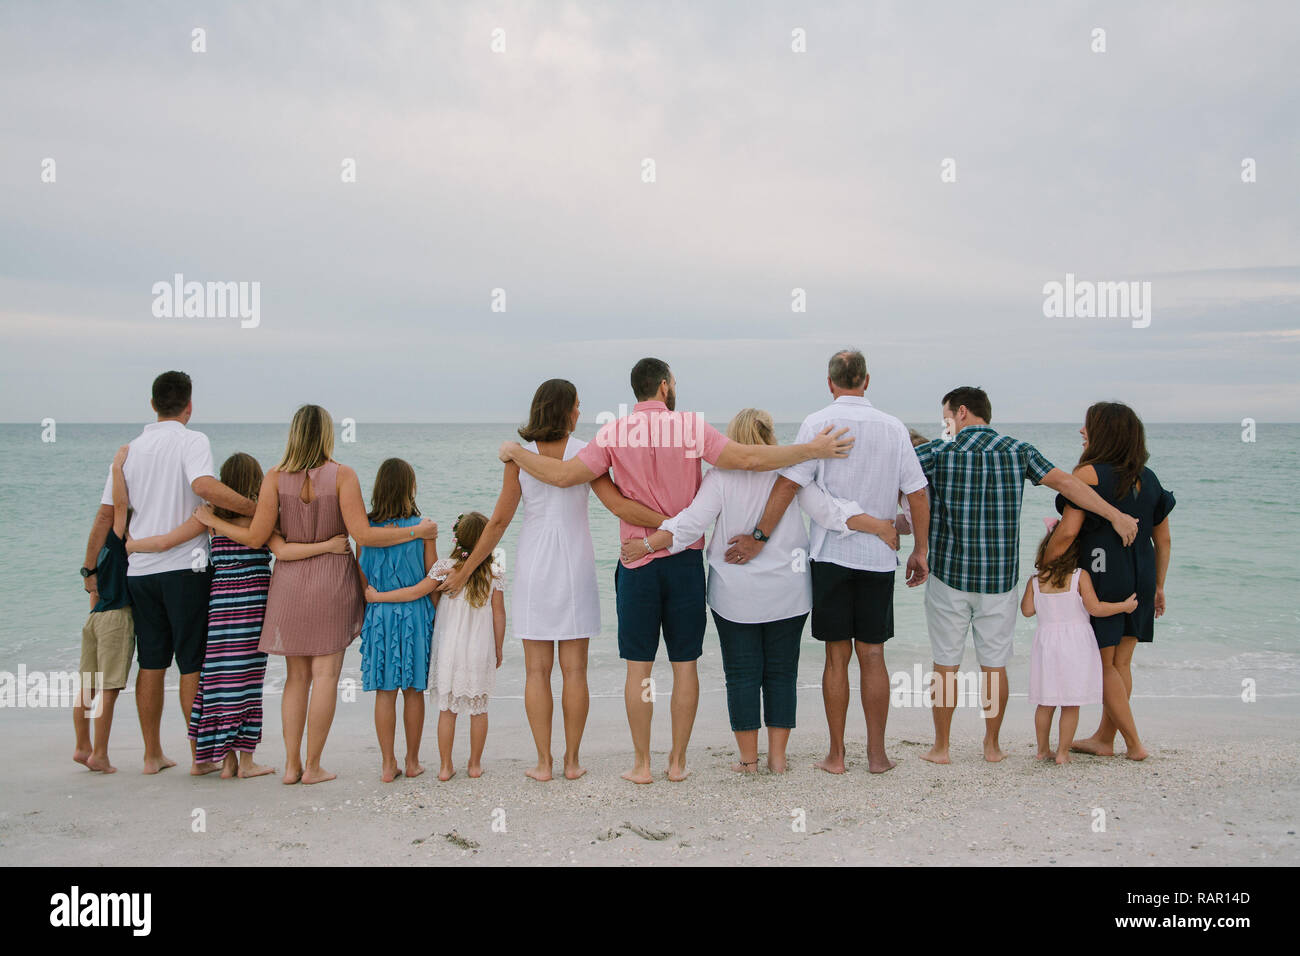 Huge Happy Traveling Caucasian Family with Adults and Kids at the Beach Hugging while facing the Ocean Horizon Outside on Destination Vacation Stock Photo